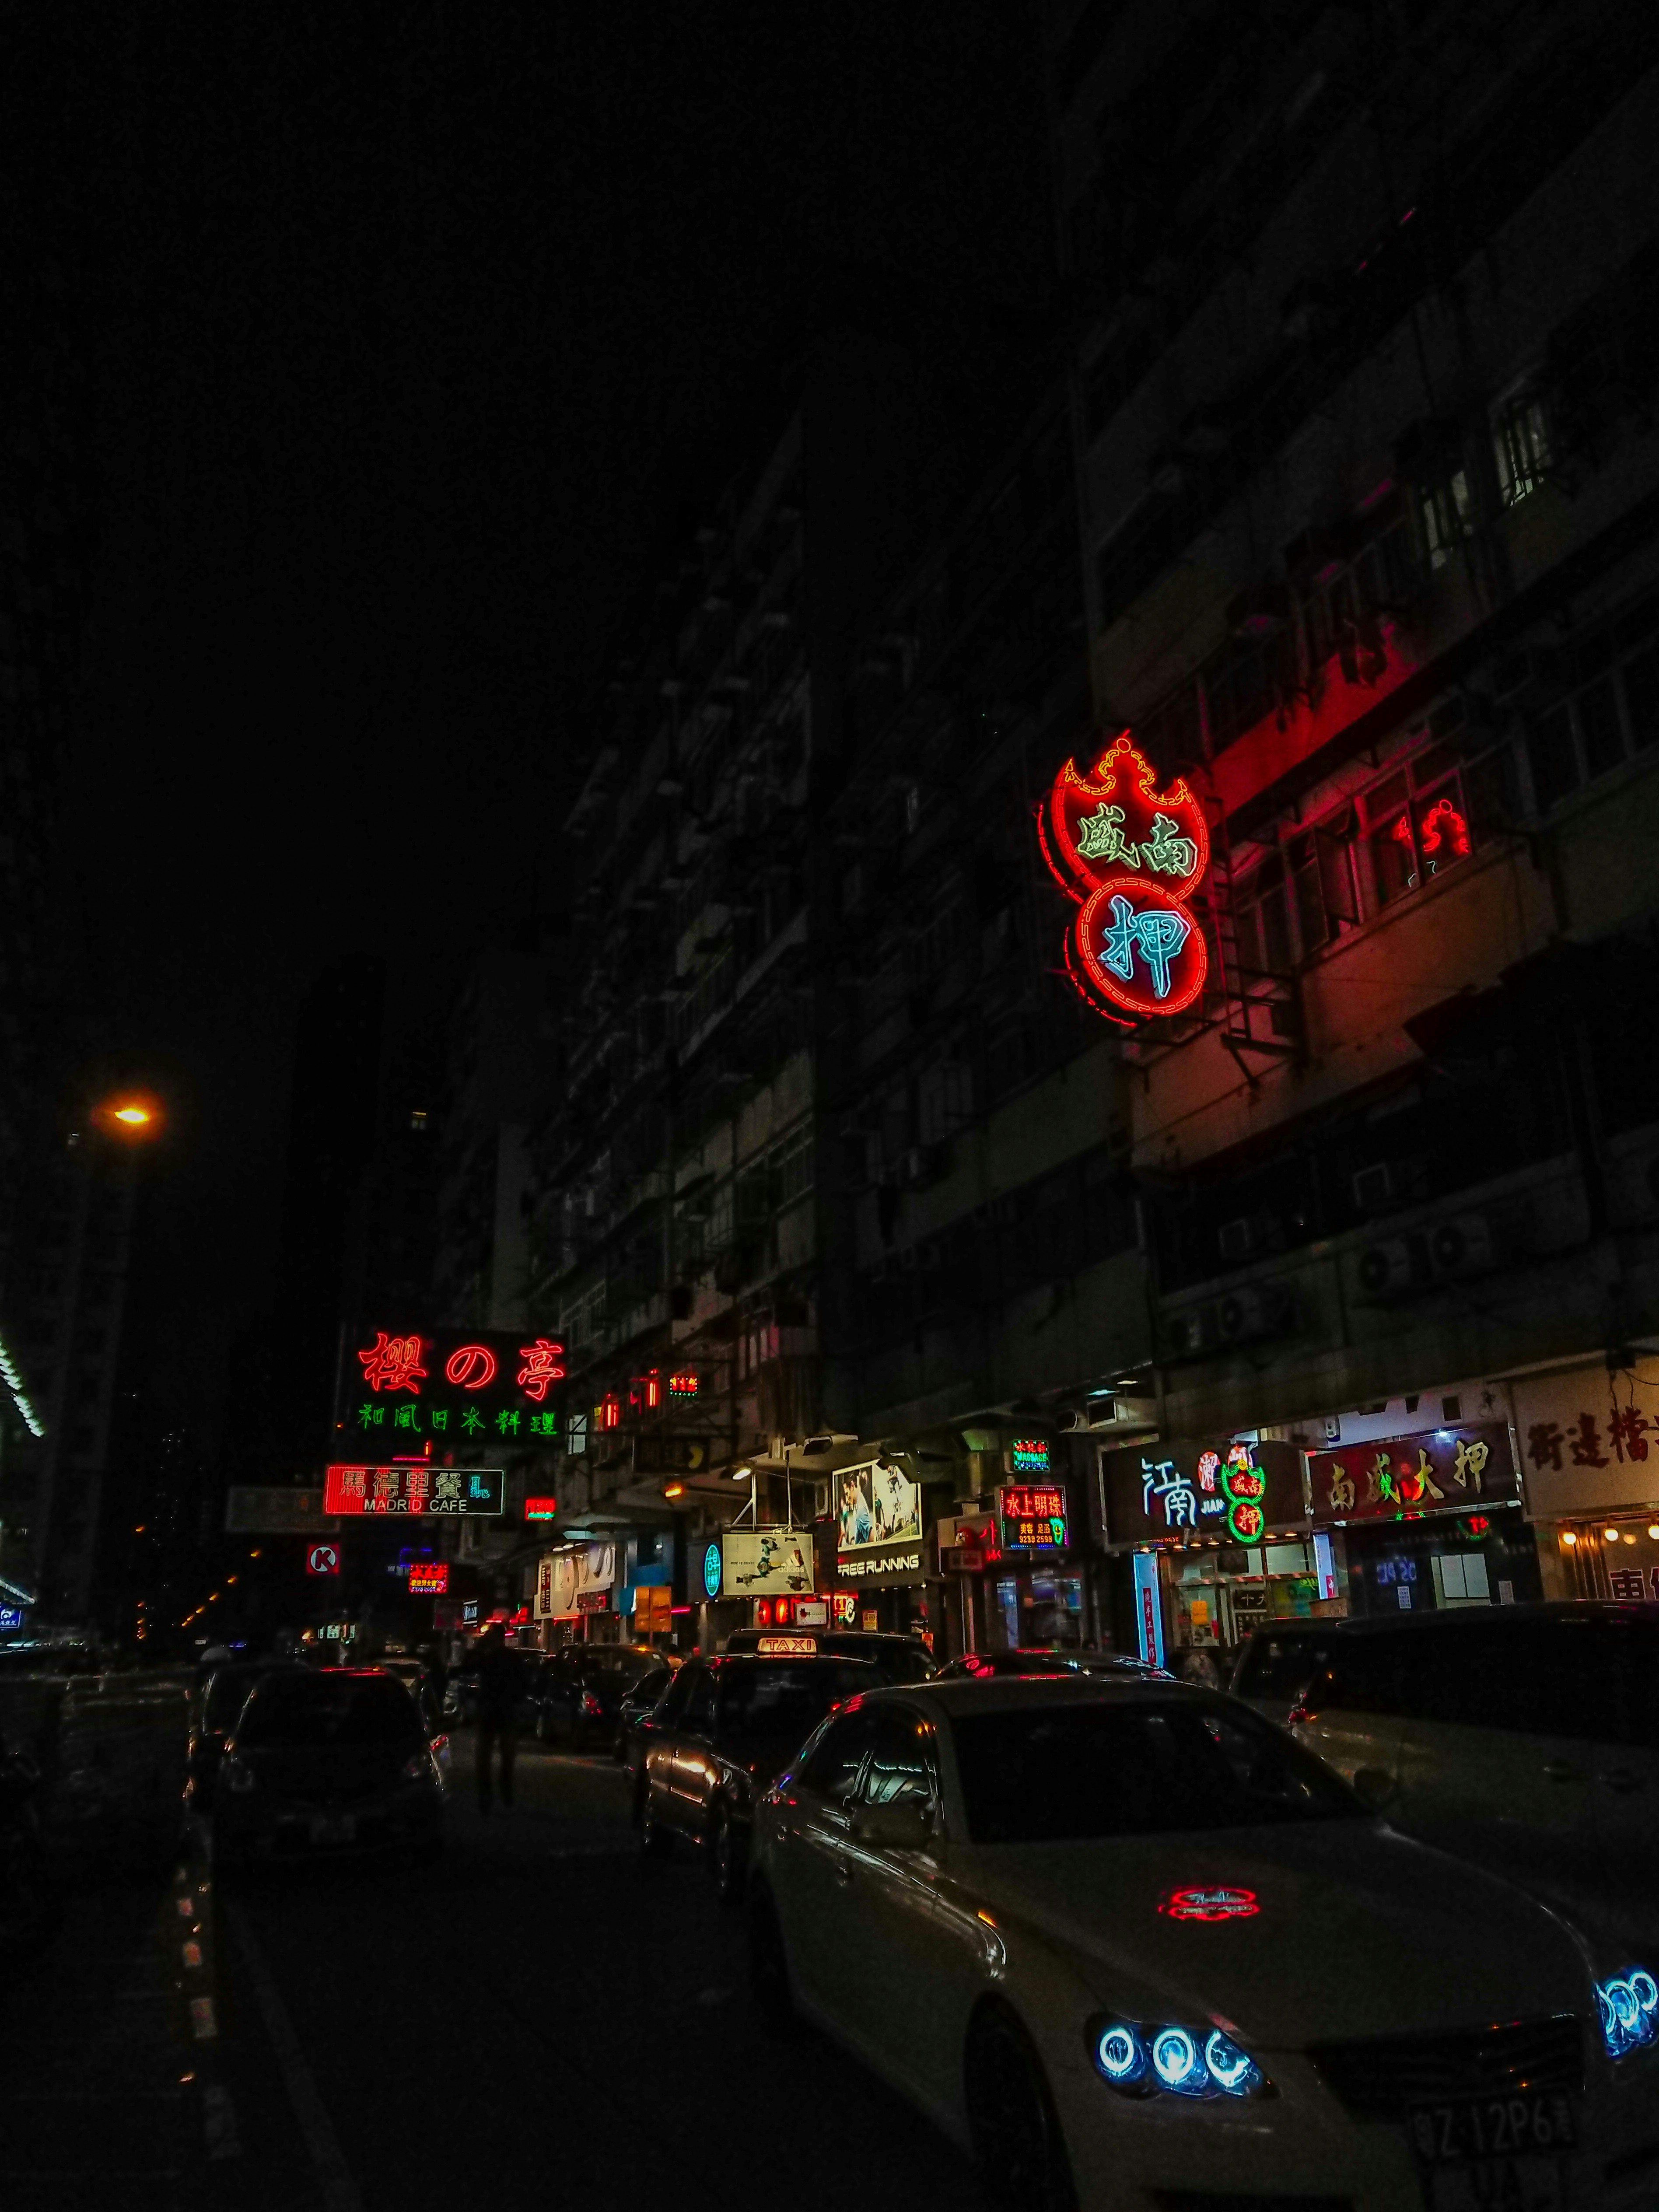 vehicles passing beside building with neon signs